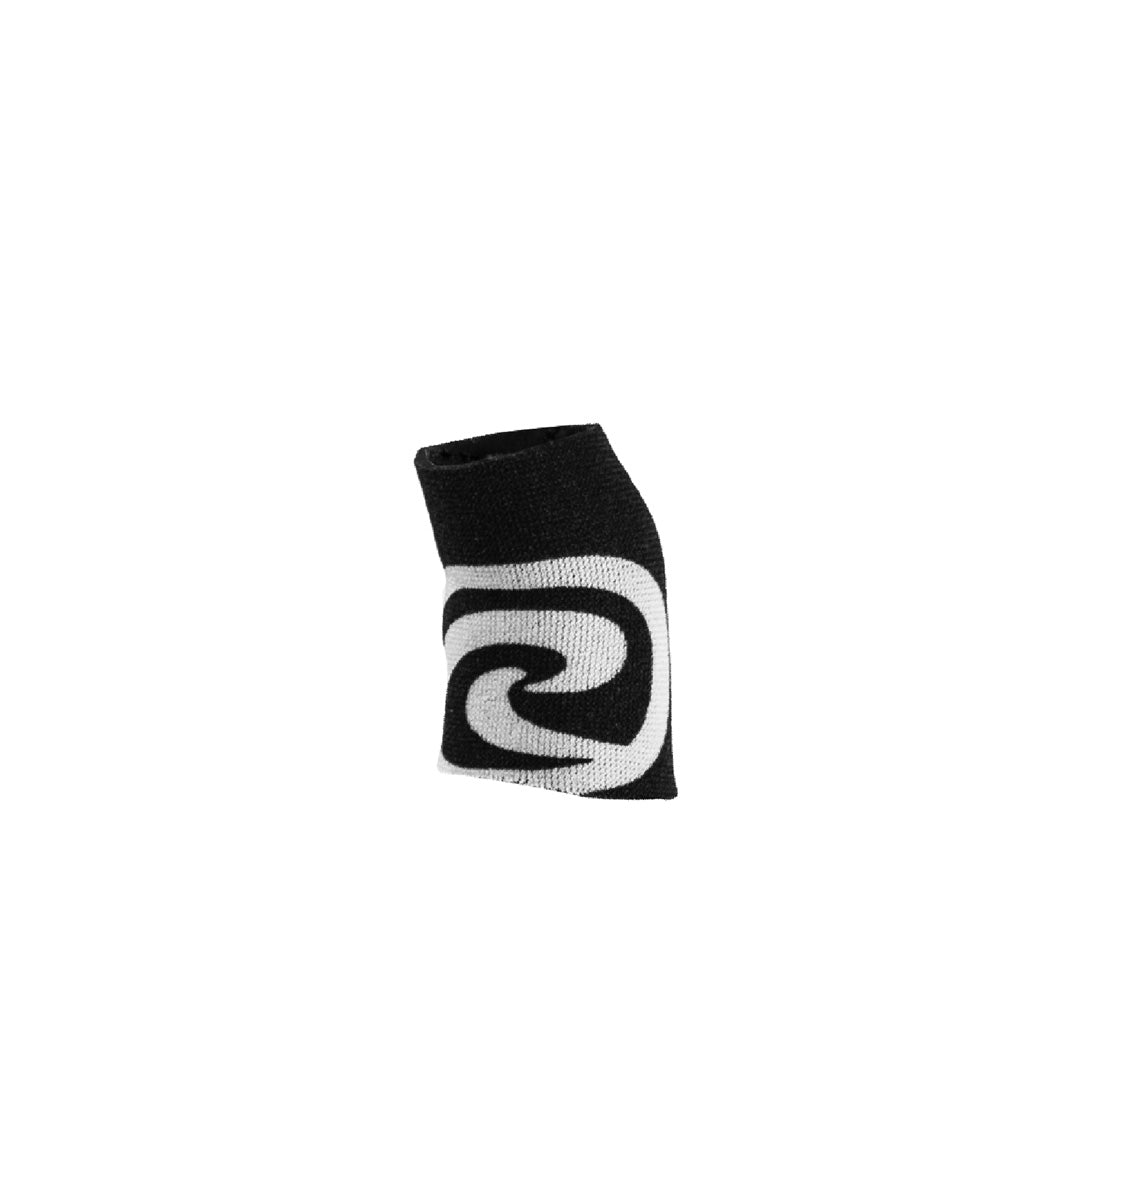 108106-01 Rehband Rx Thumb Sleeves Black 1.5mm - Front